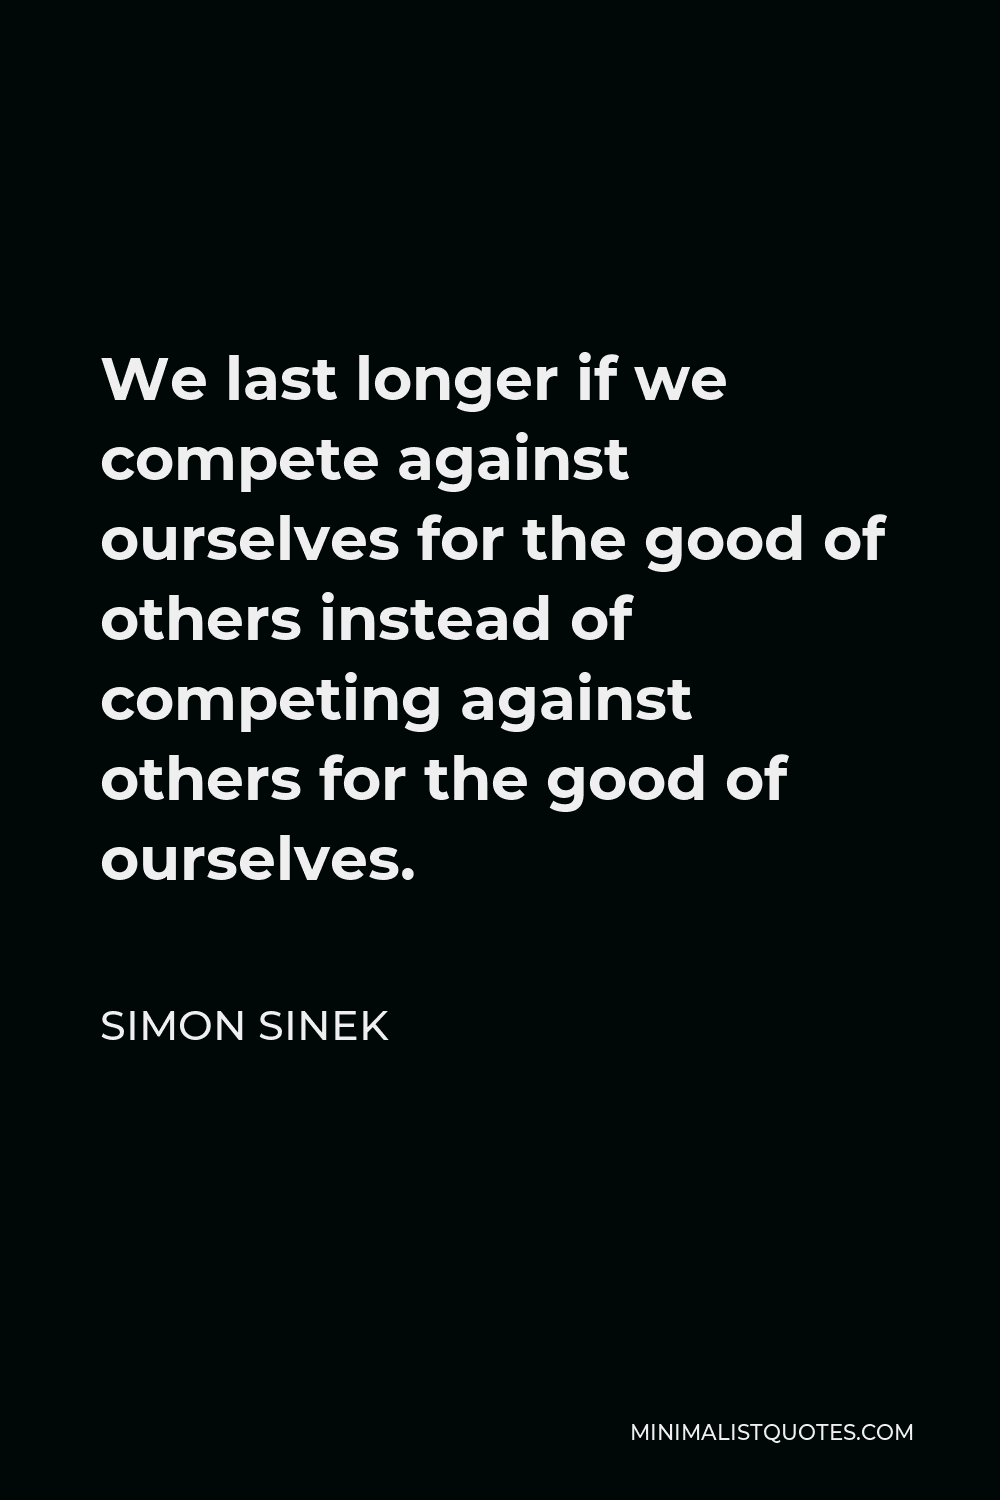 Simon Sinek Quote - We last longer if we compete against ourselves for the good of others instead of competing against others for the good of ourselves.